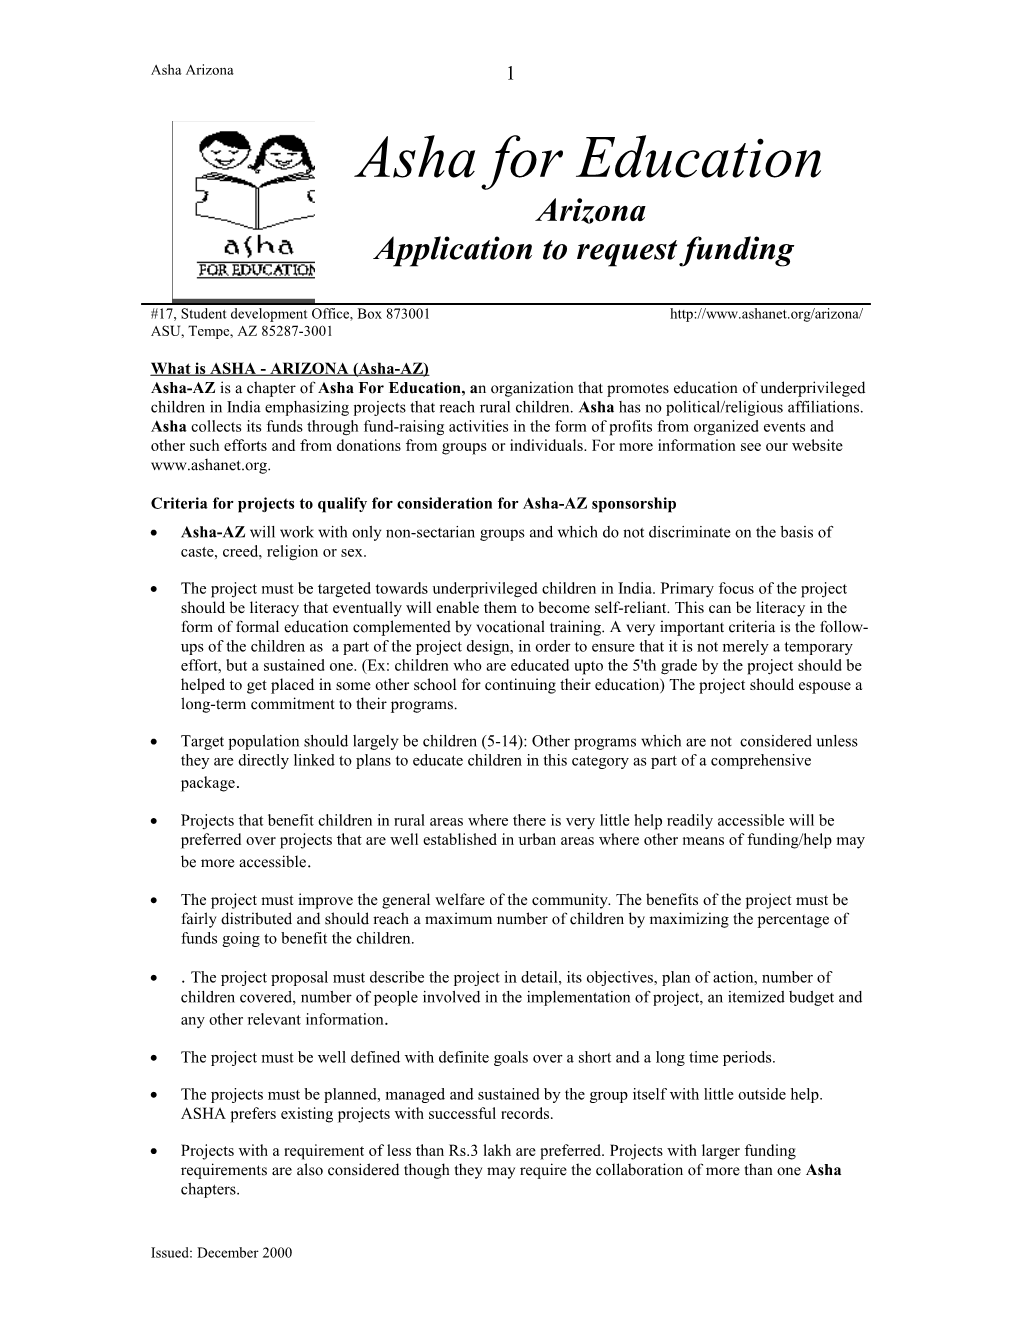 Application Form to Request Funding from ASHA- Arizona